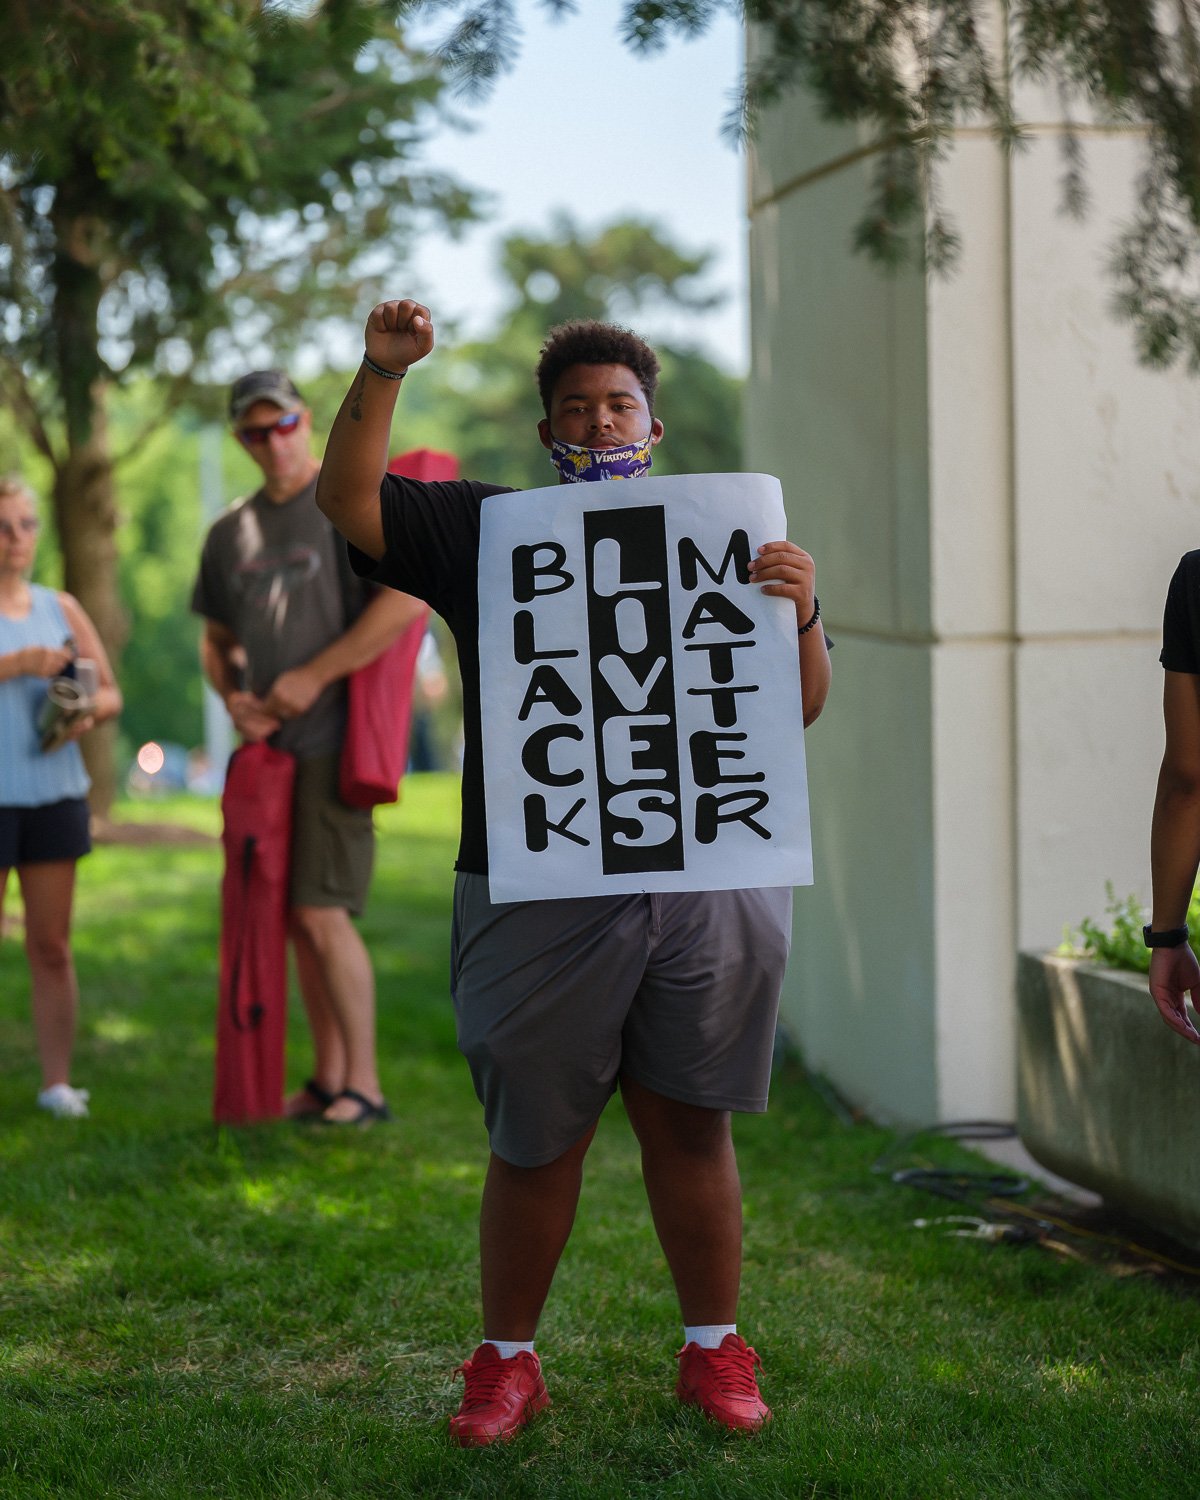  Jammal Hunter, Black Lives Matter Protestor, after the "Back the Blue" rally at Memorial Park, Omaha, NE, for The New York Times, 2020 